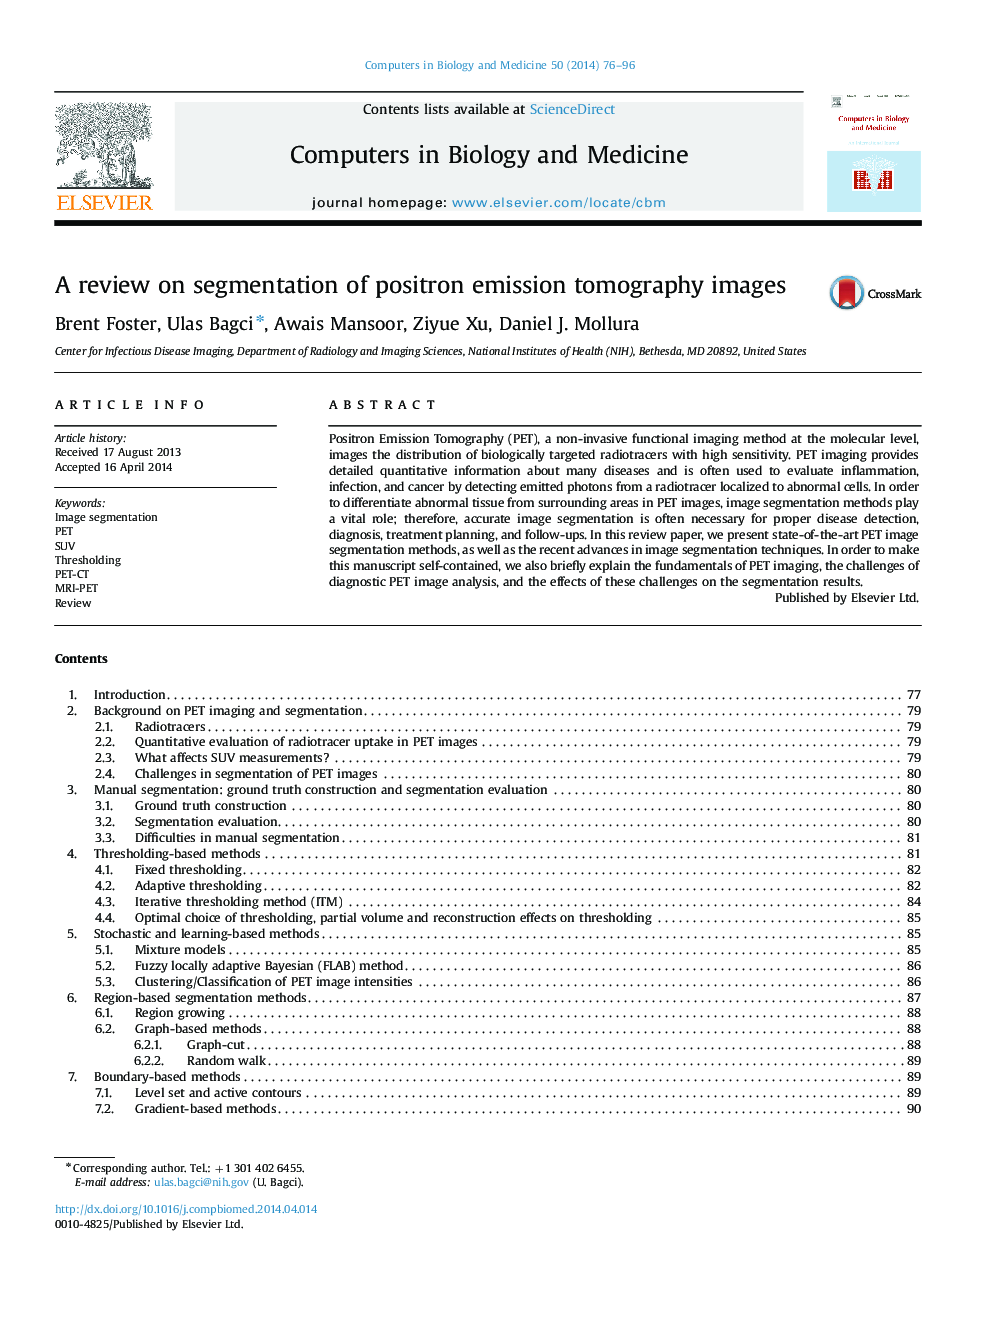 A review on segmentation of positron emission tomography images